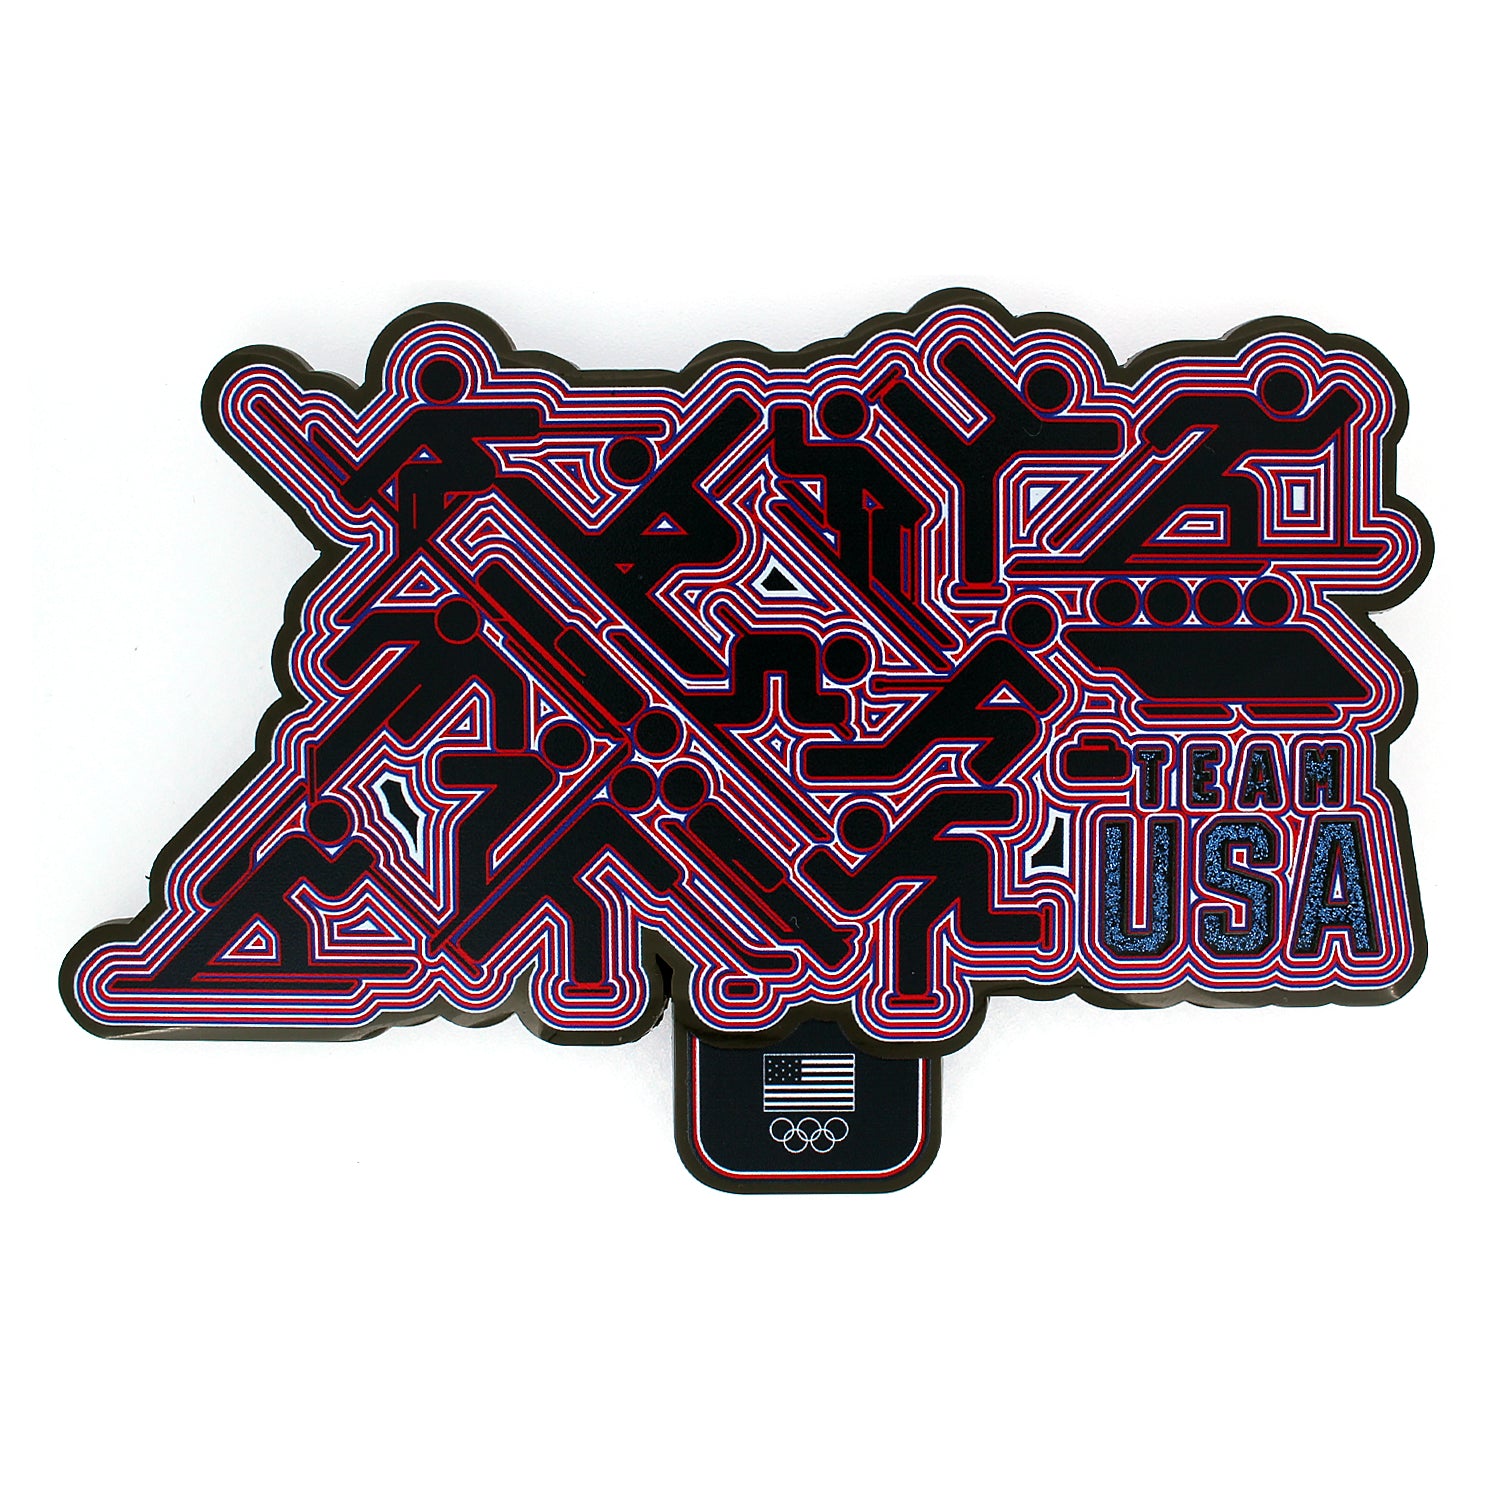 Oversized Team USA Olympic Radiant Pictogram Collage Pin